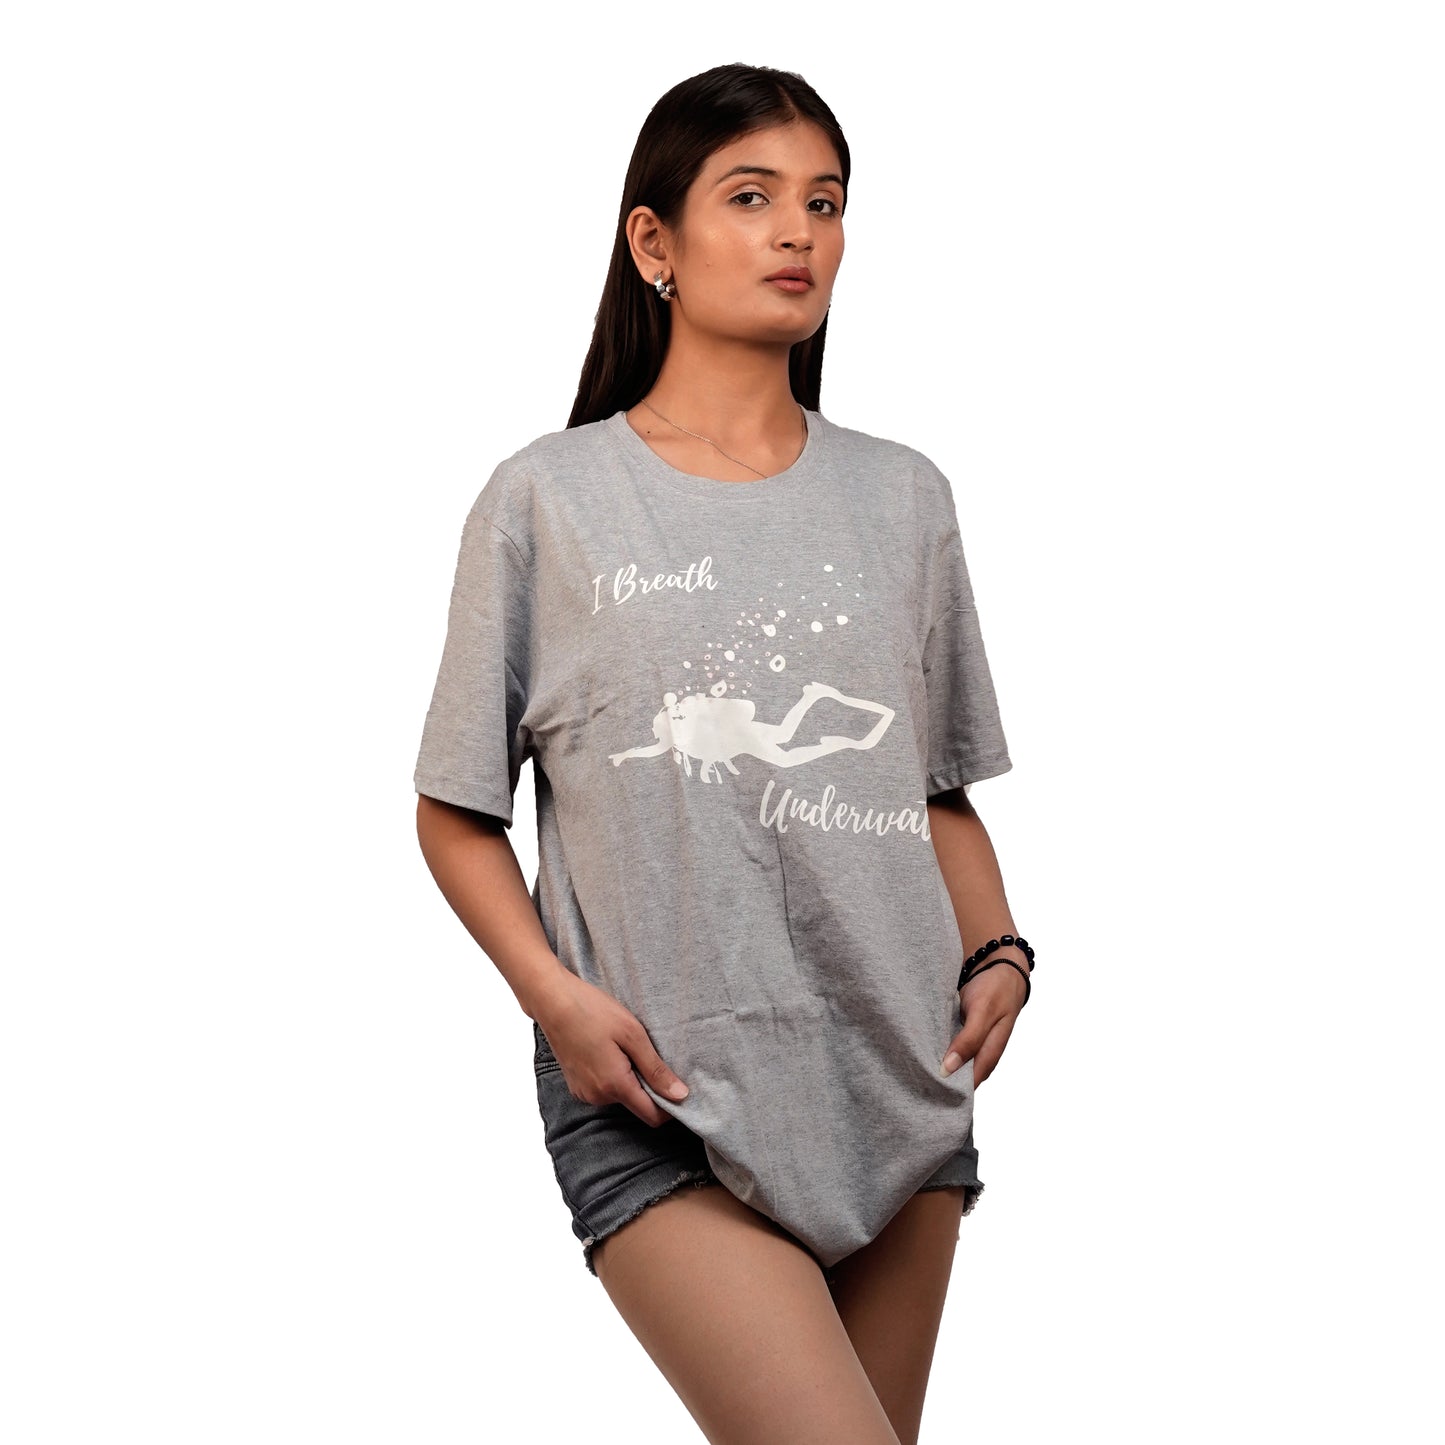 I Breathe Underwater T-Shirt In Grey Color For Women